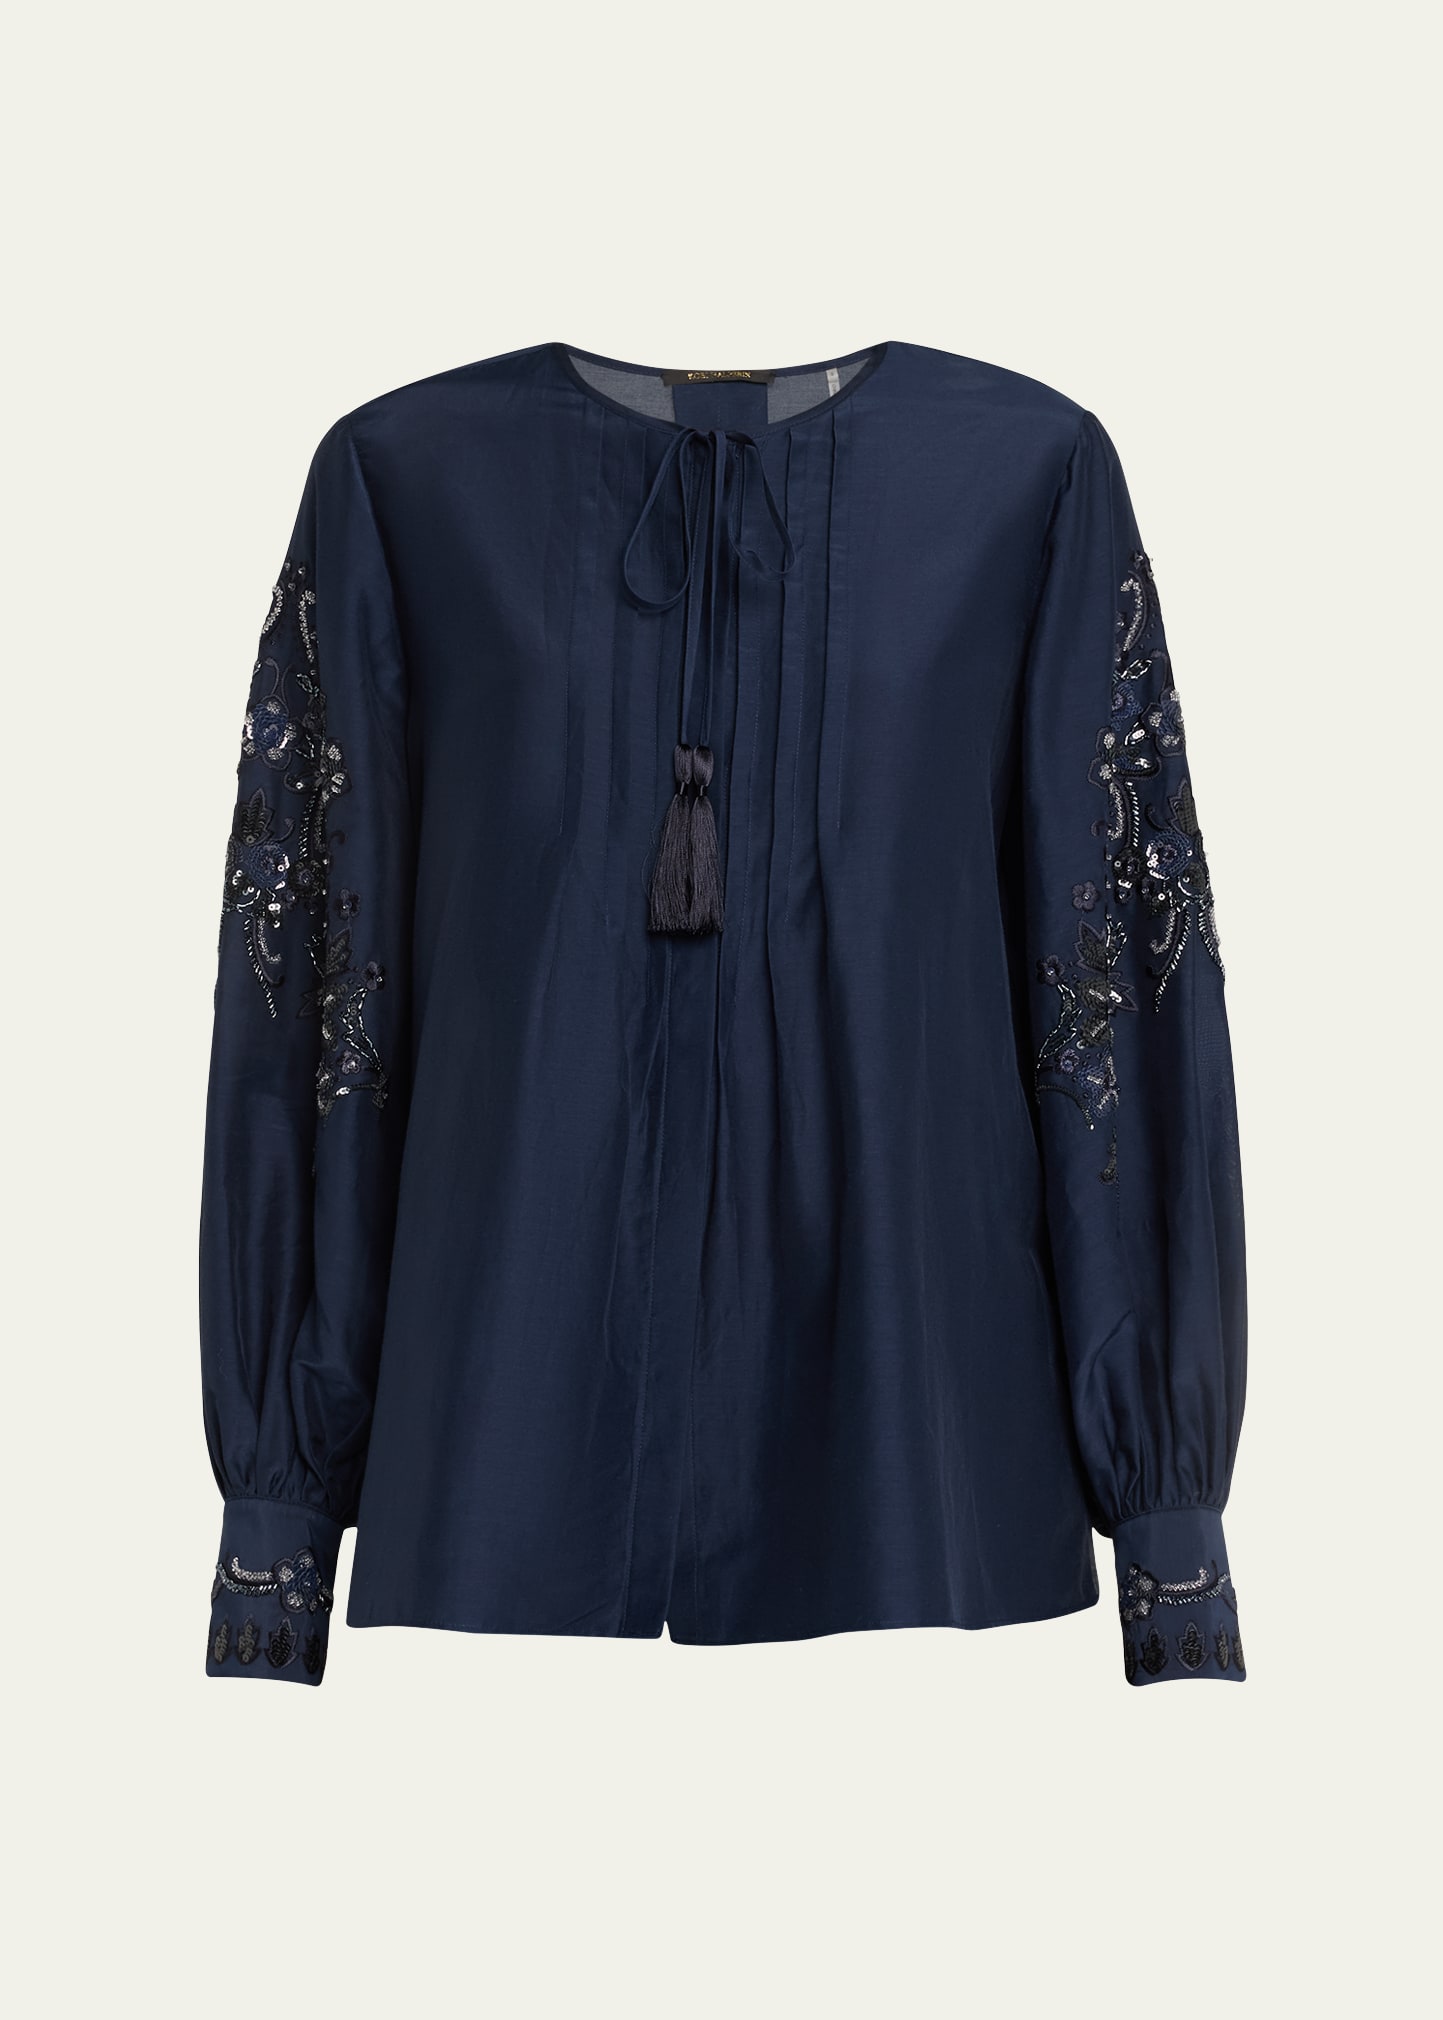 Acacia Sequin Floral-Embroidered Blouse